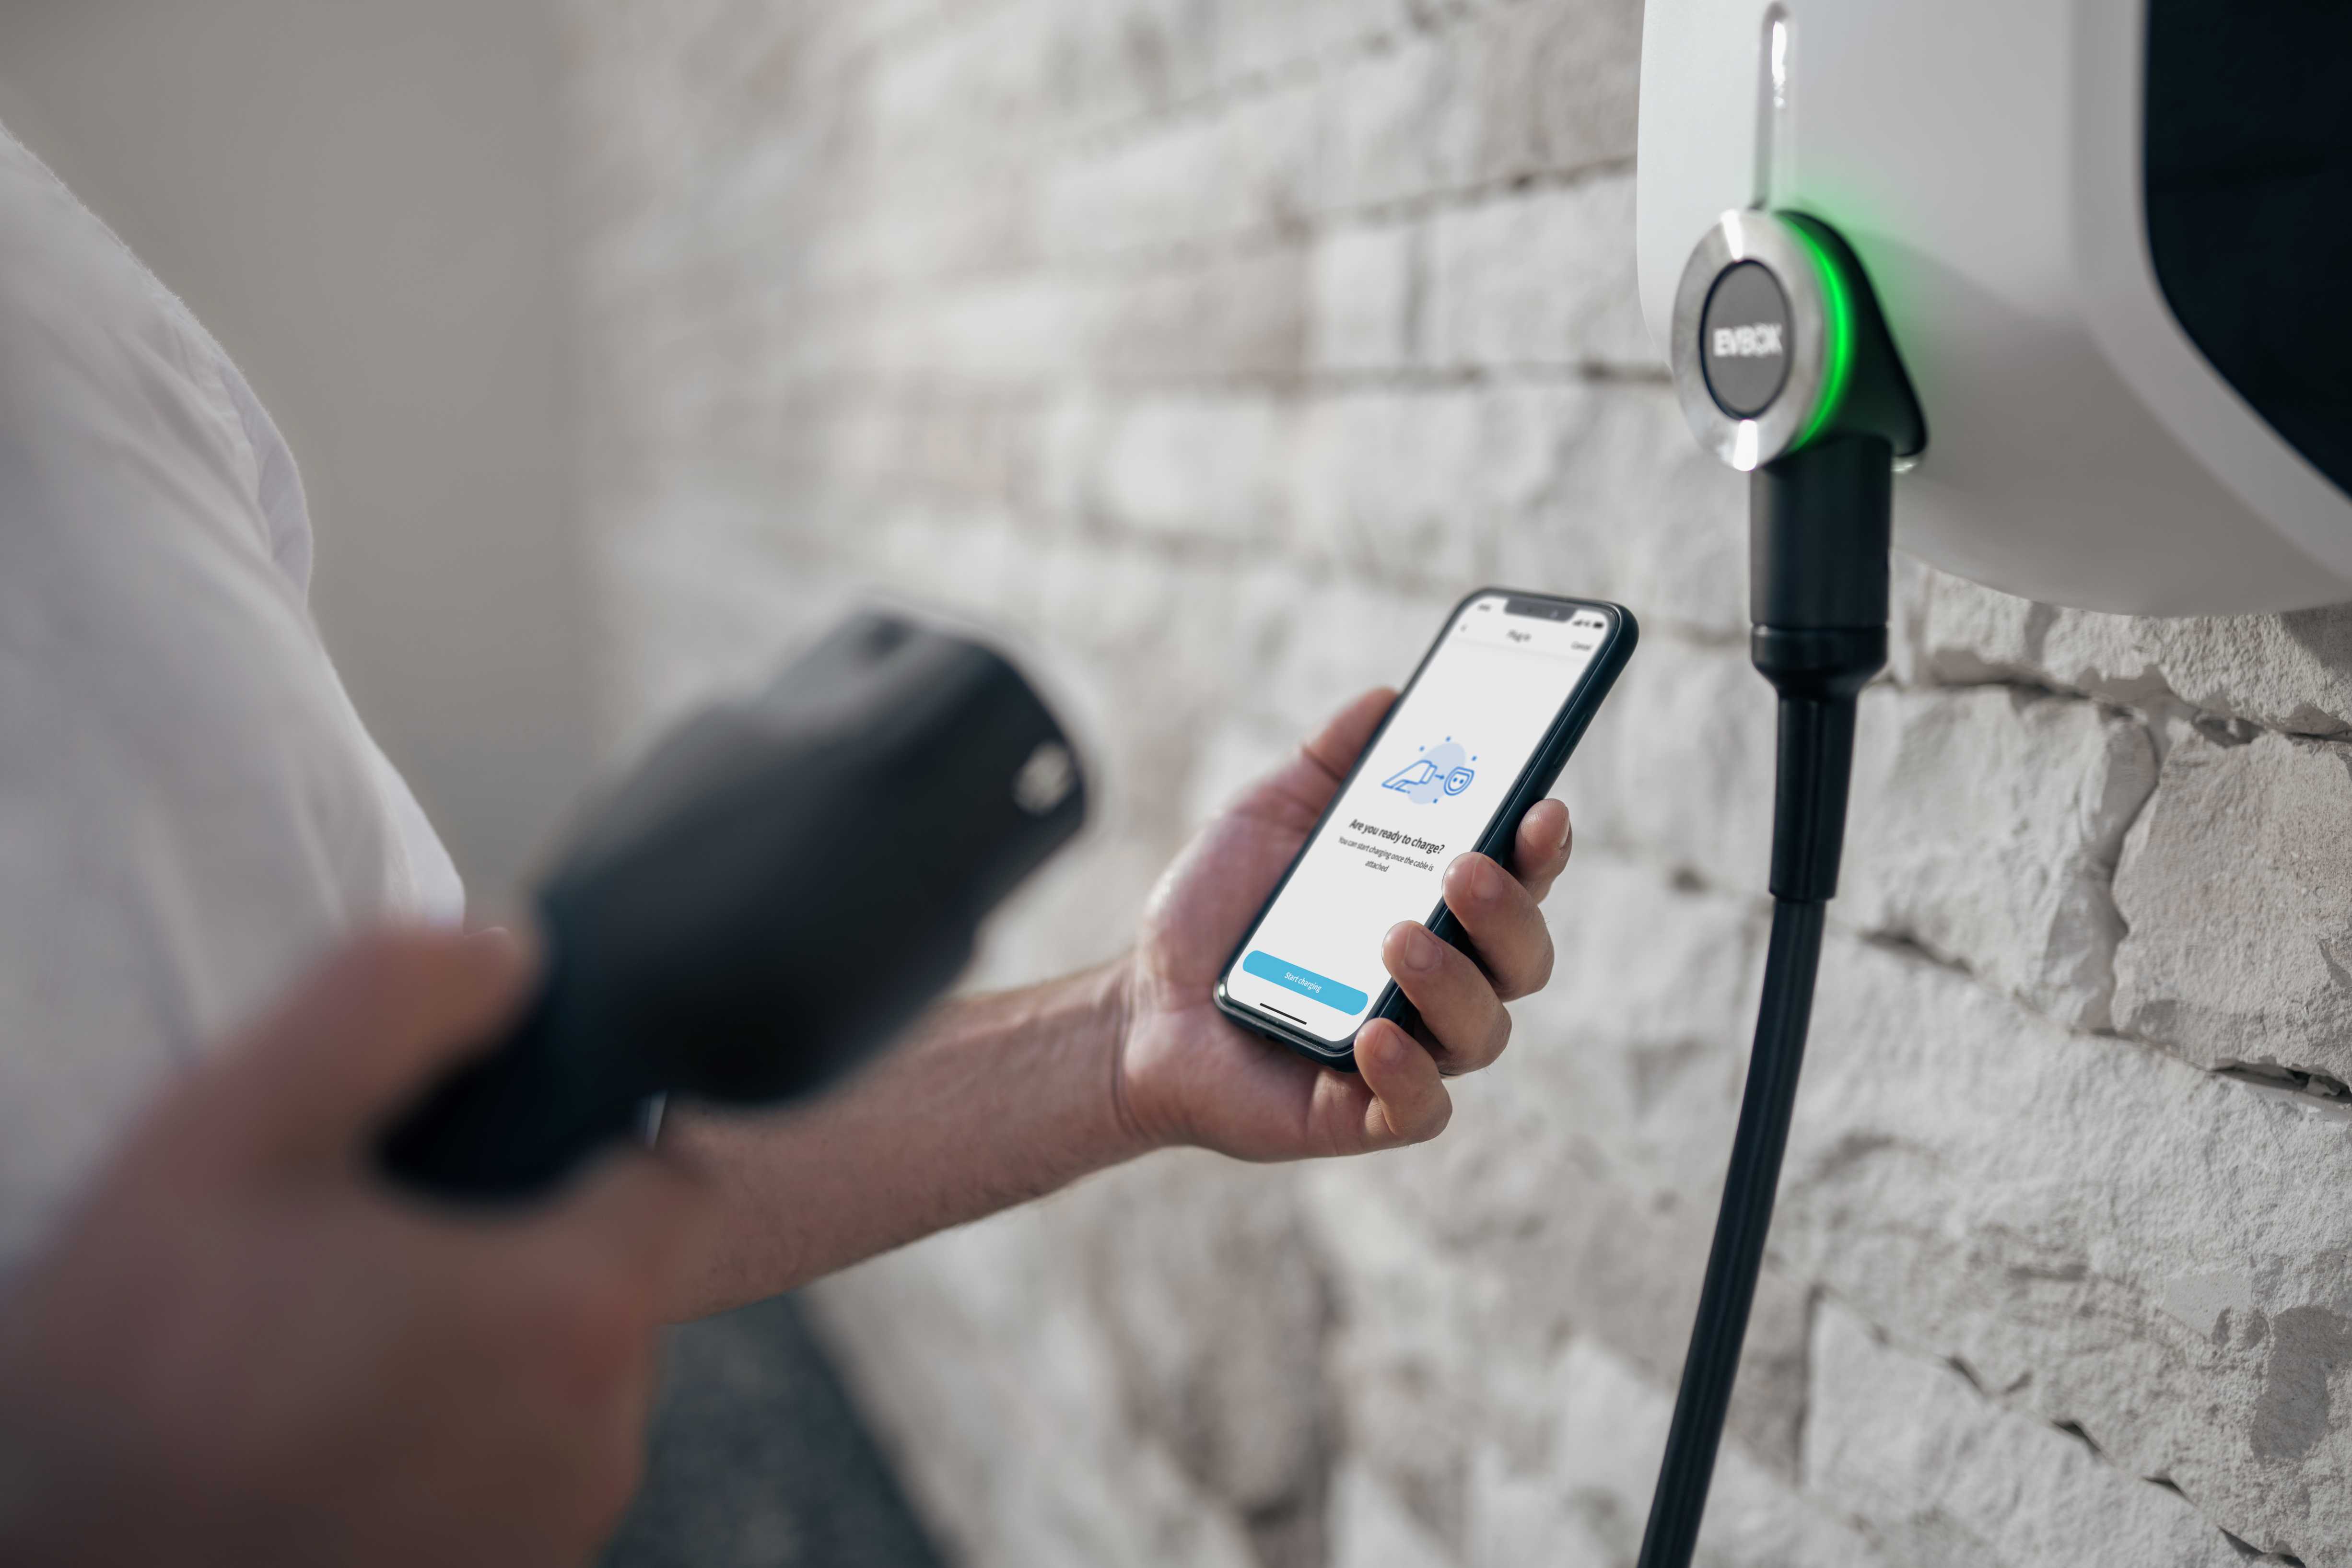 A man standing in front of an EVBox Elvi home charging station that's mounted on the wall. In one hand he's holding a smartphone on his left hand (showing the EVBox Everon charging app) with a message asking if he's are ready to charge. In his other hand, he holds the charging cable.